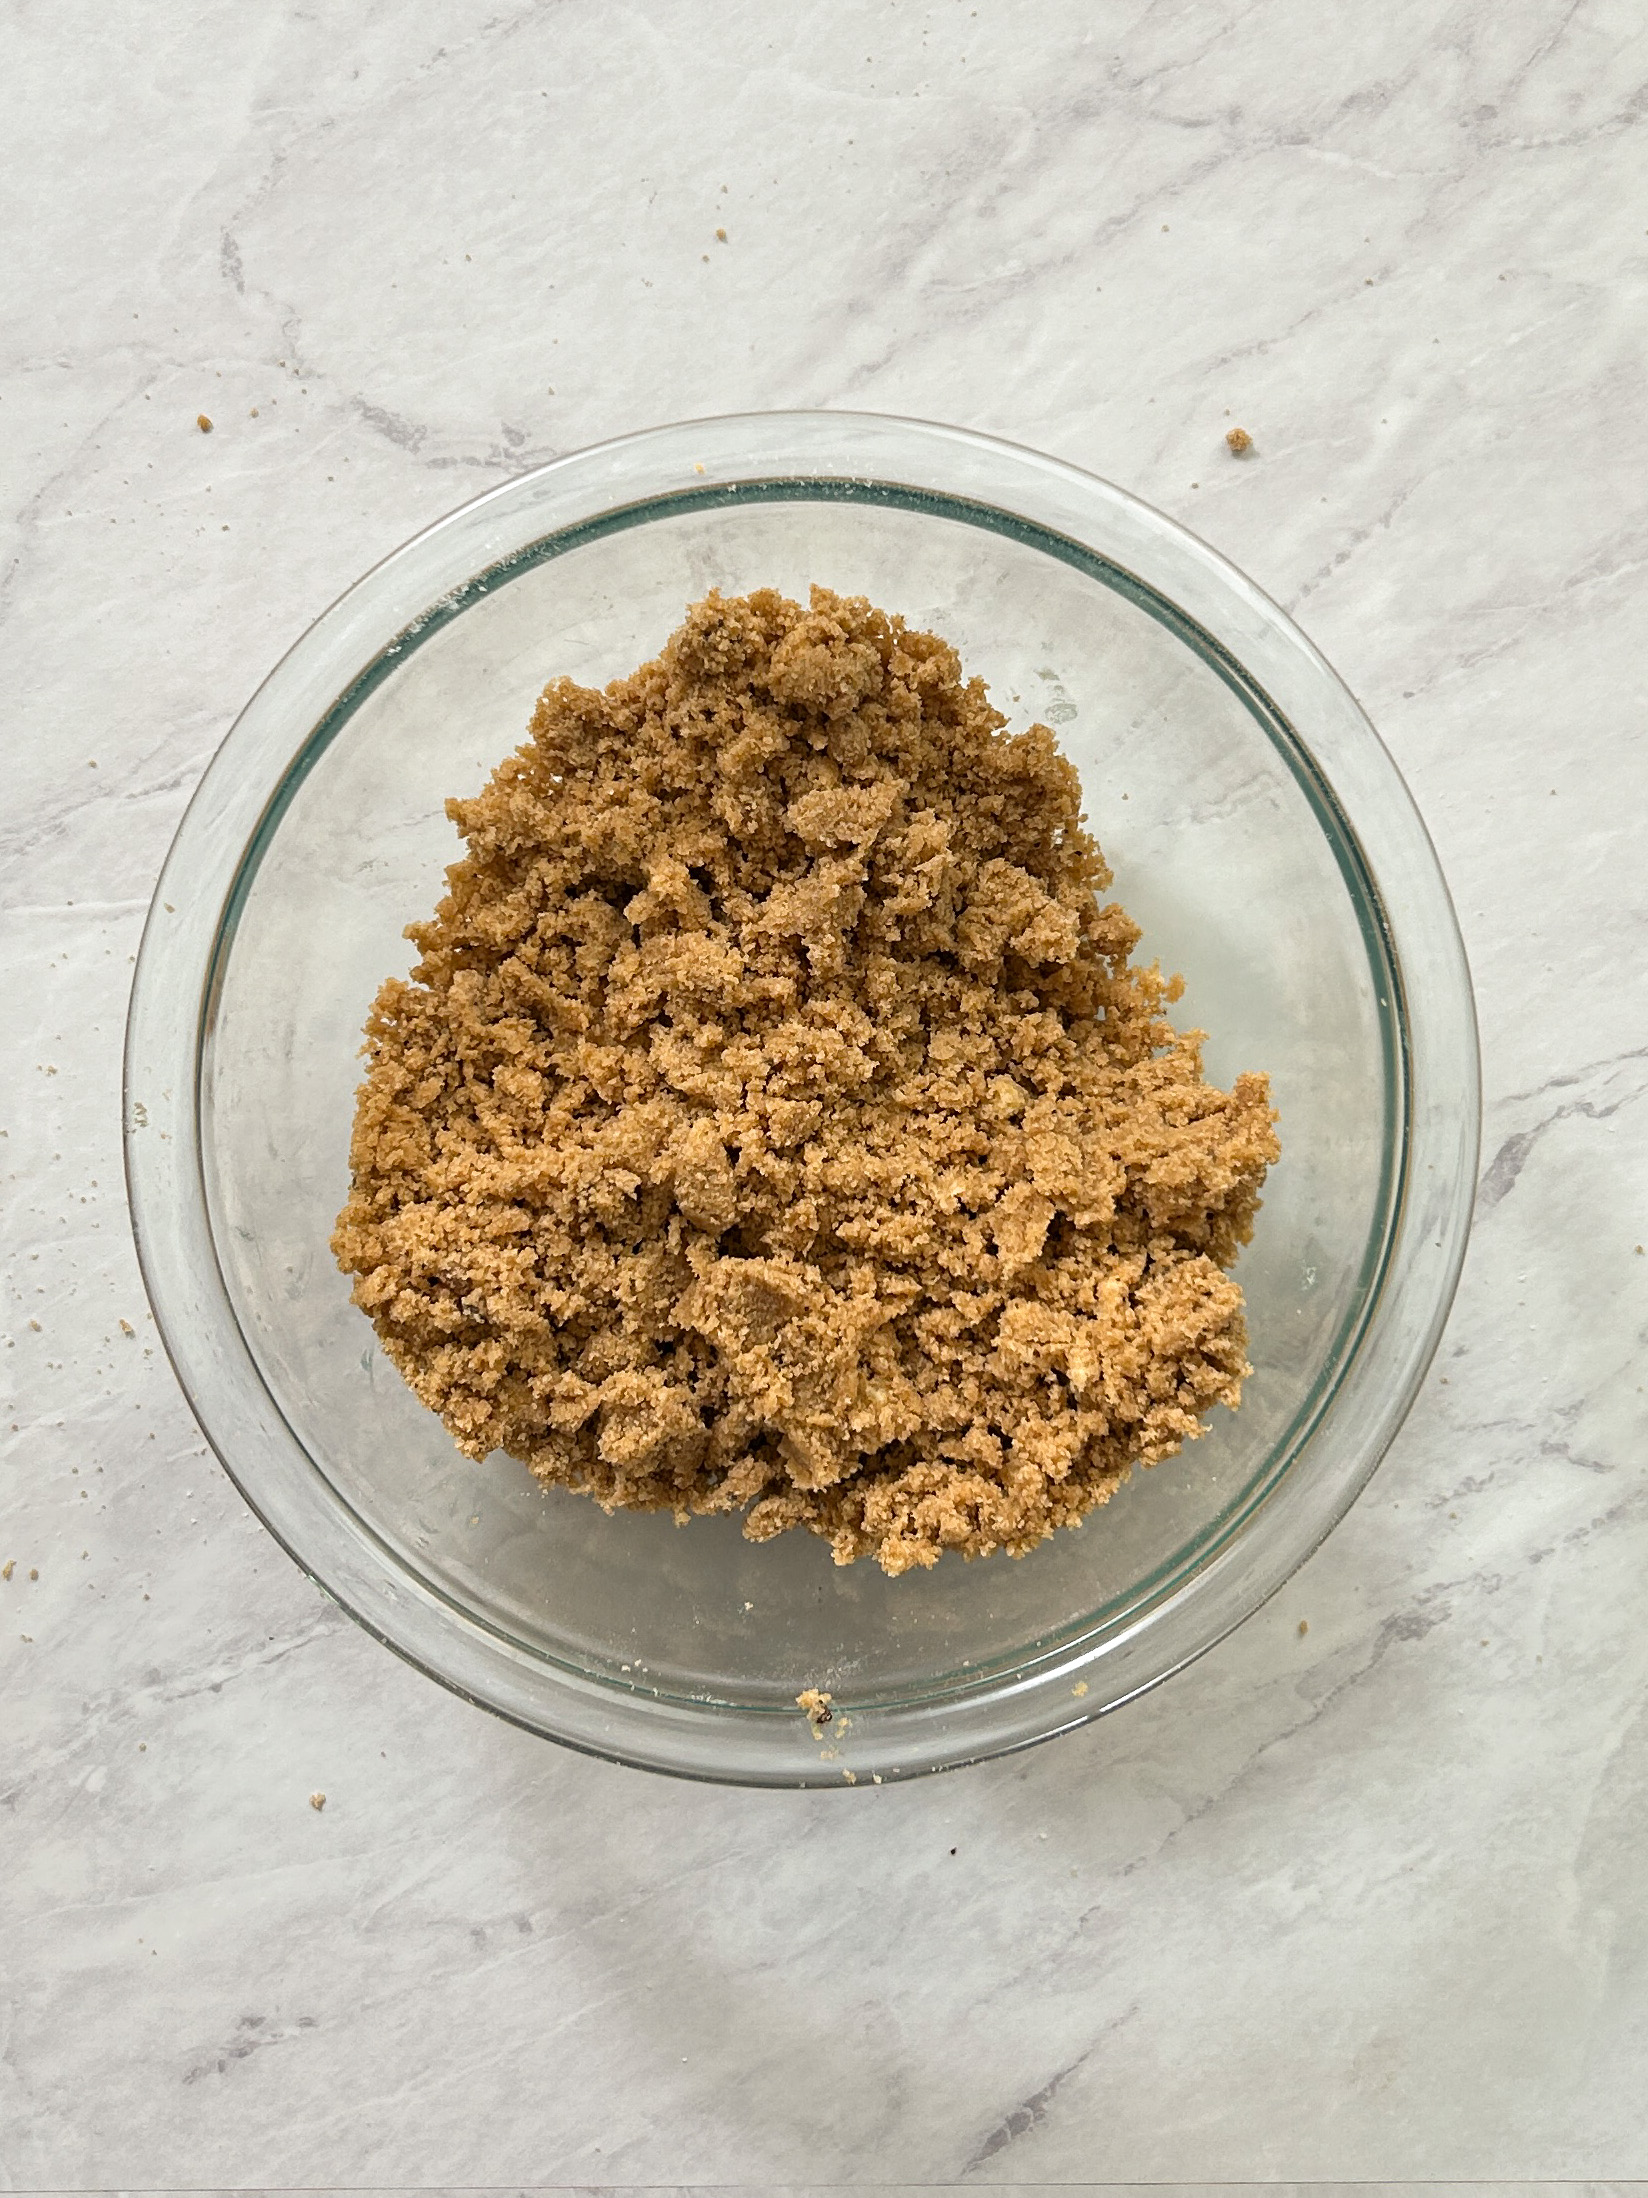 crumbly coffee streusel mixture in a bowl